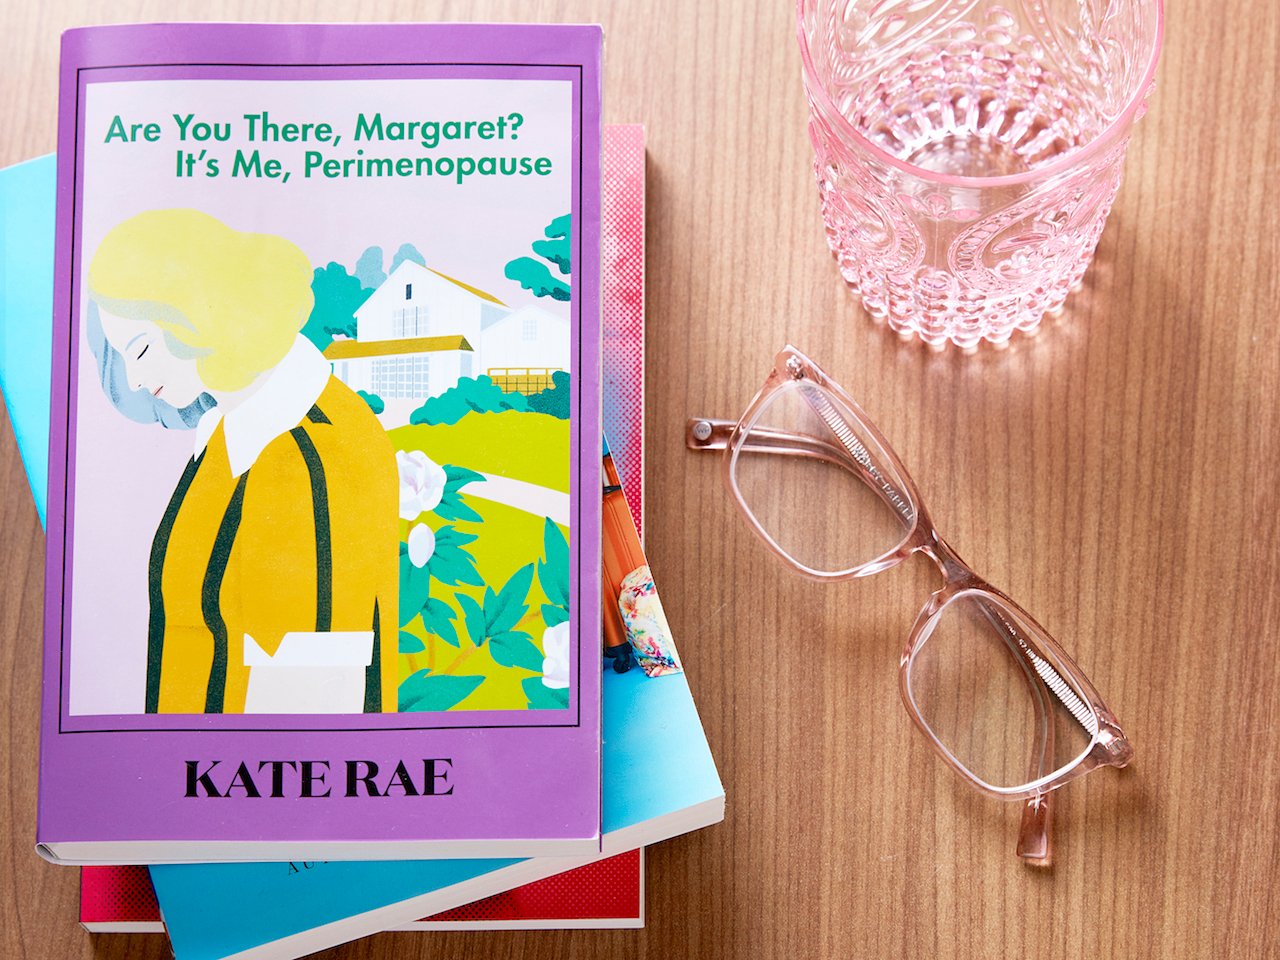 Overhead shot of a stack of books, glasses, and an empty glass of water. Top book on stack says "Are you there, Margaret? It's me, Perimenopause" and shows a blonde woman hanging her head